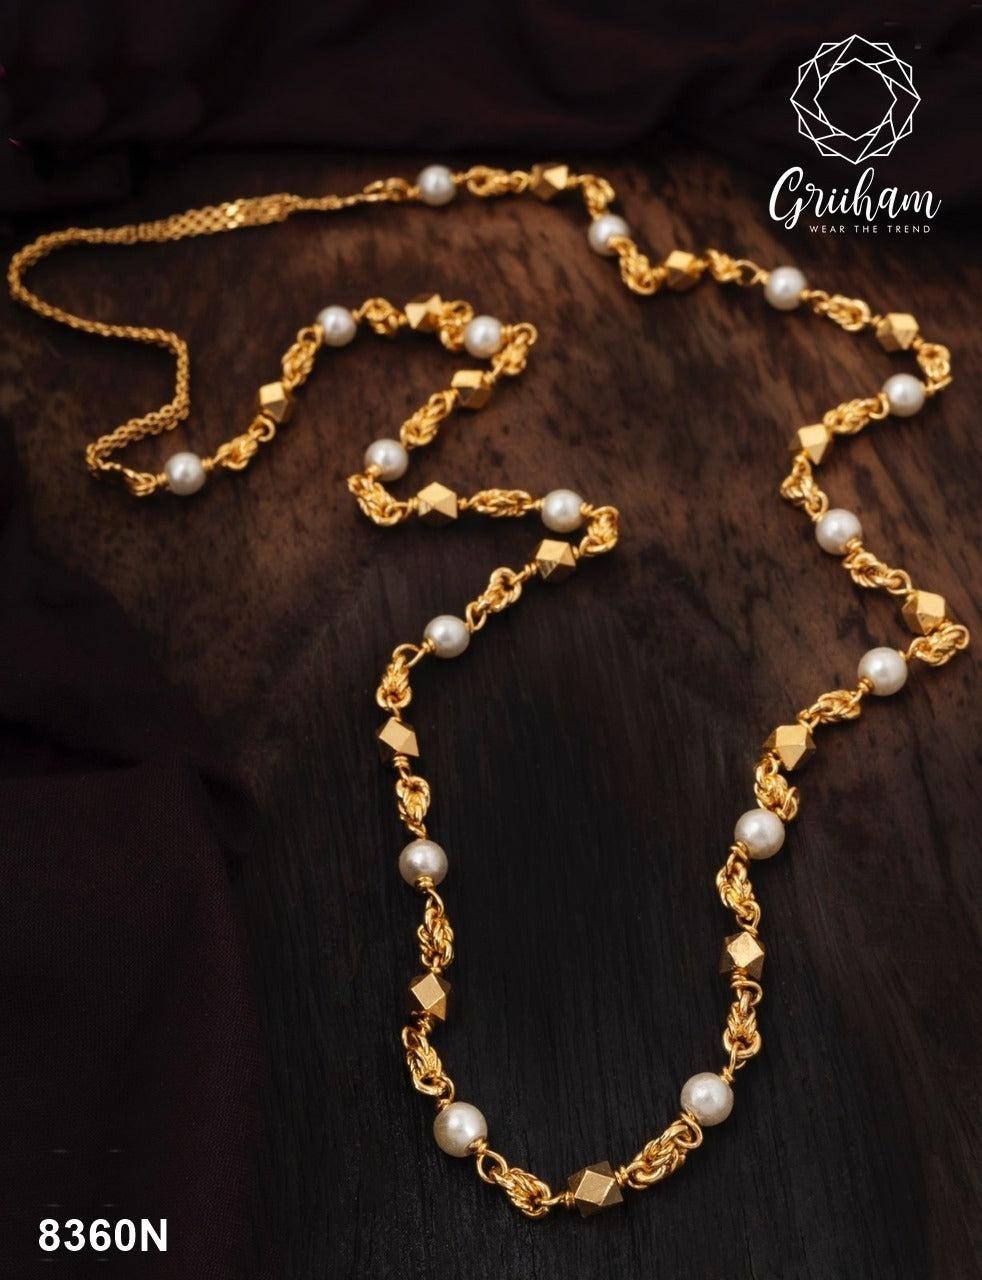 23.5 kt gold plated Guaranteed beads chain 30 INCHES 8360N-Beads Chains-Griiham-Griiham